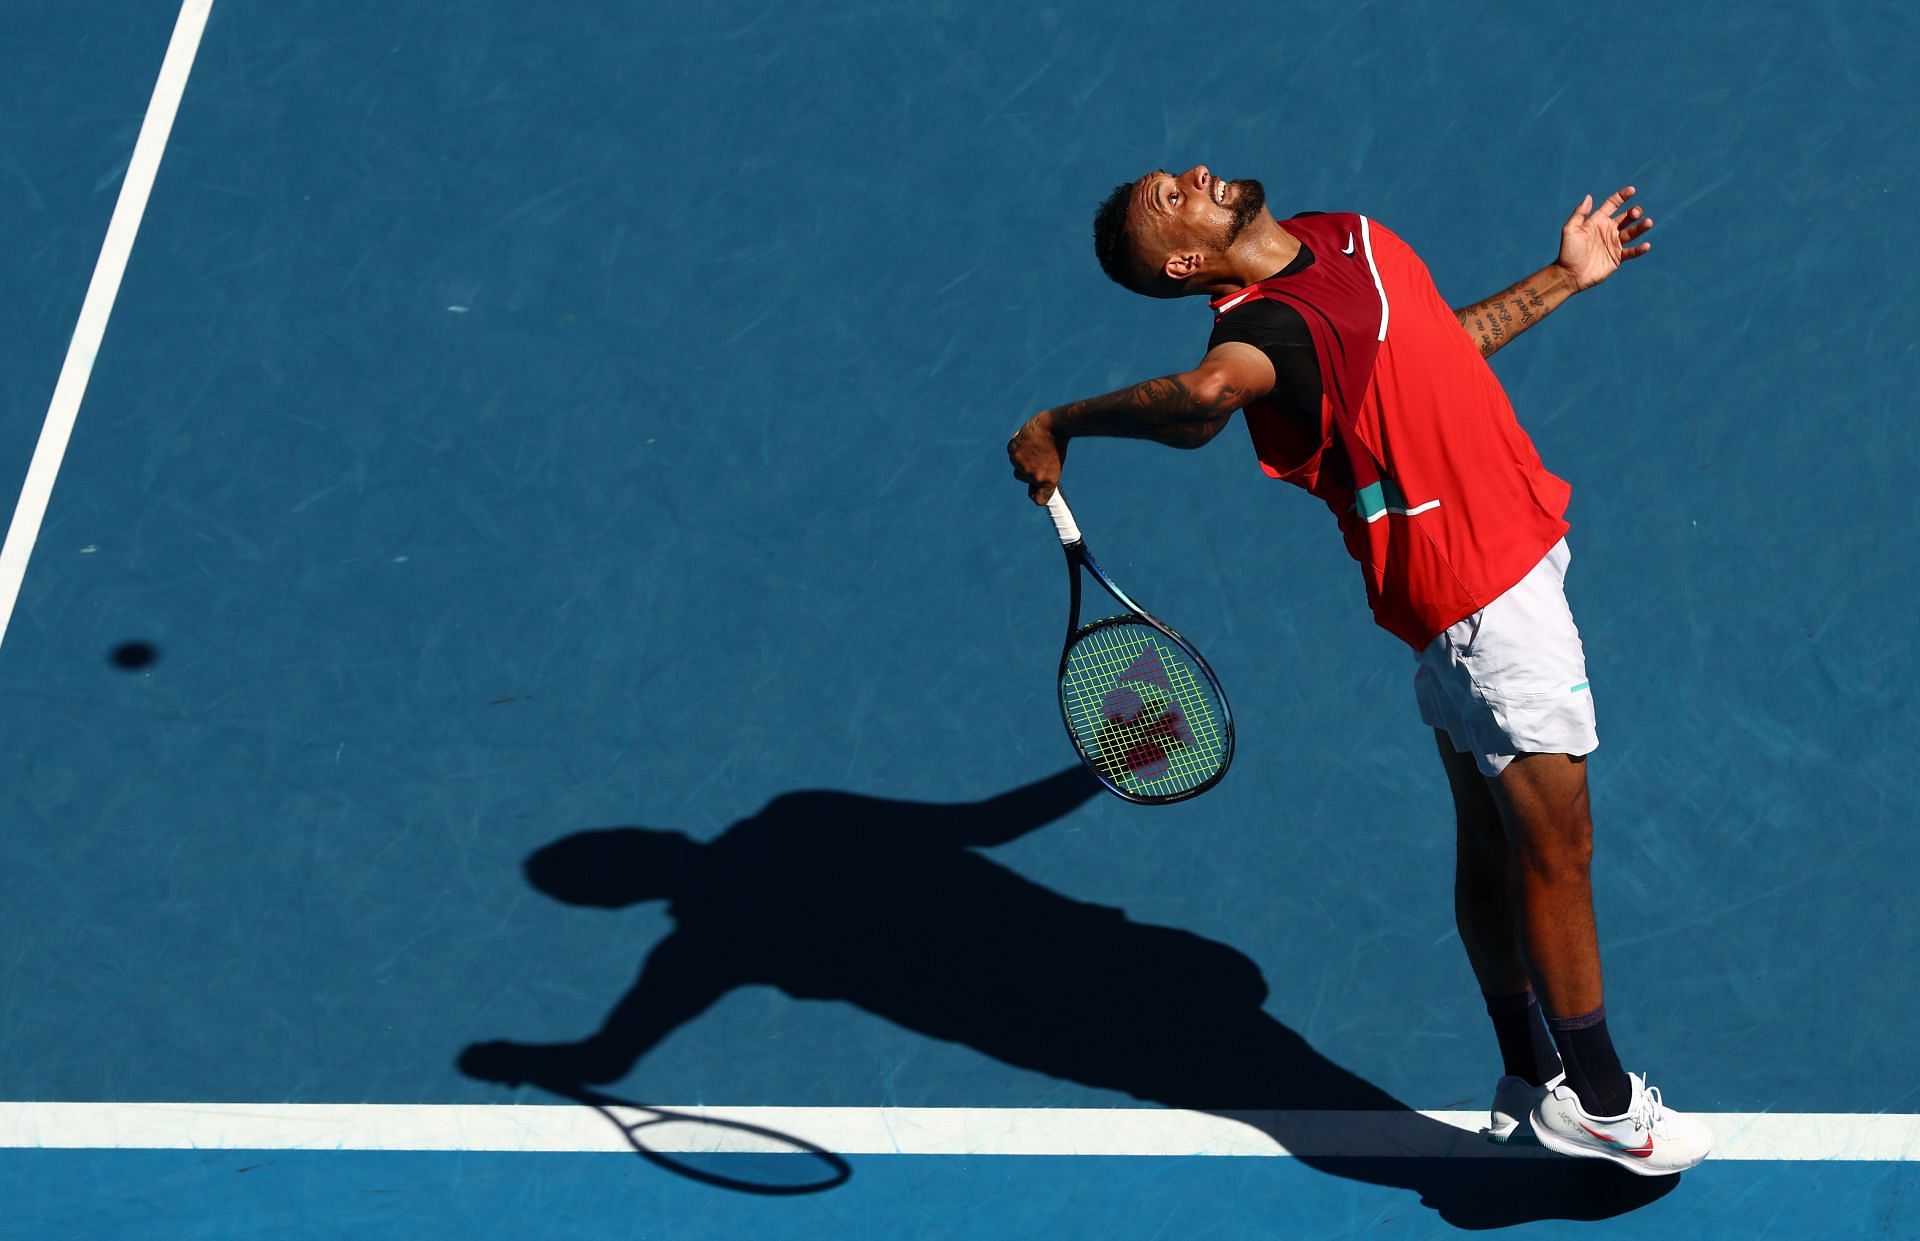 Nick Kyrgios at the 2022 Australian Open: Day 11